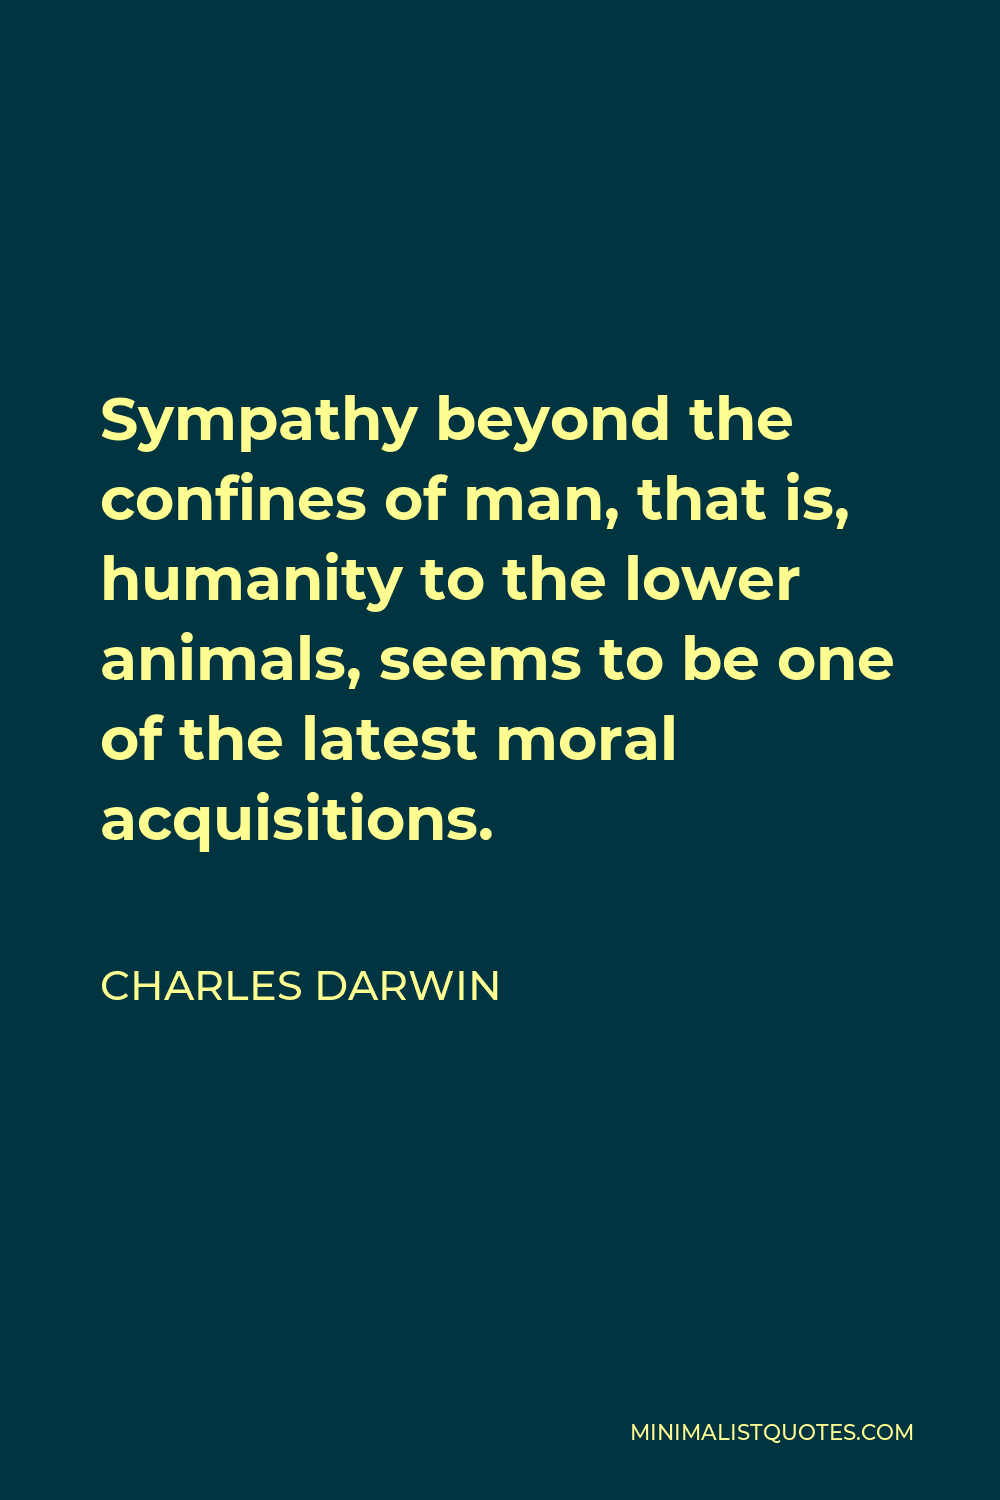 Charles Darwin Quote - Sympathy beyond the confines of man, that is, humanity to the lower animals, seems to be one of the latest moral acquisitions.